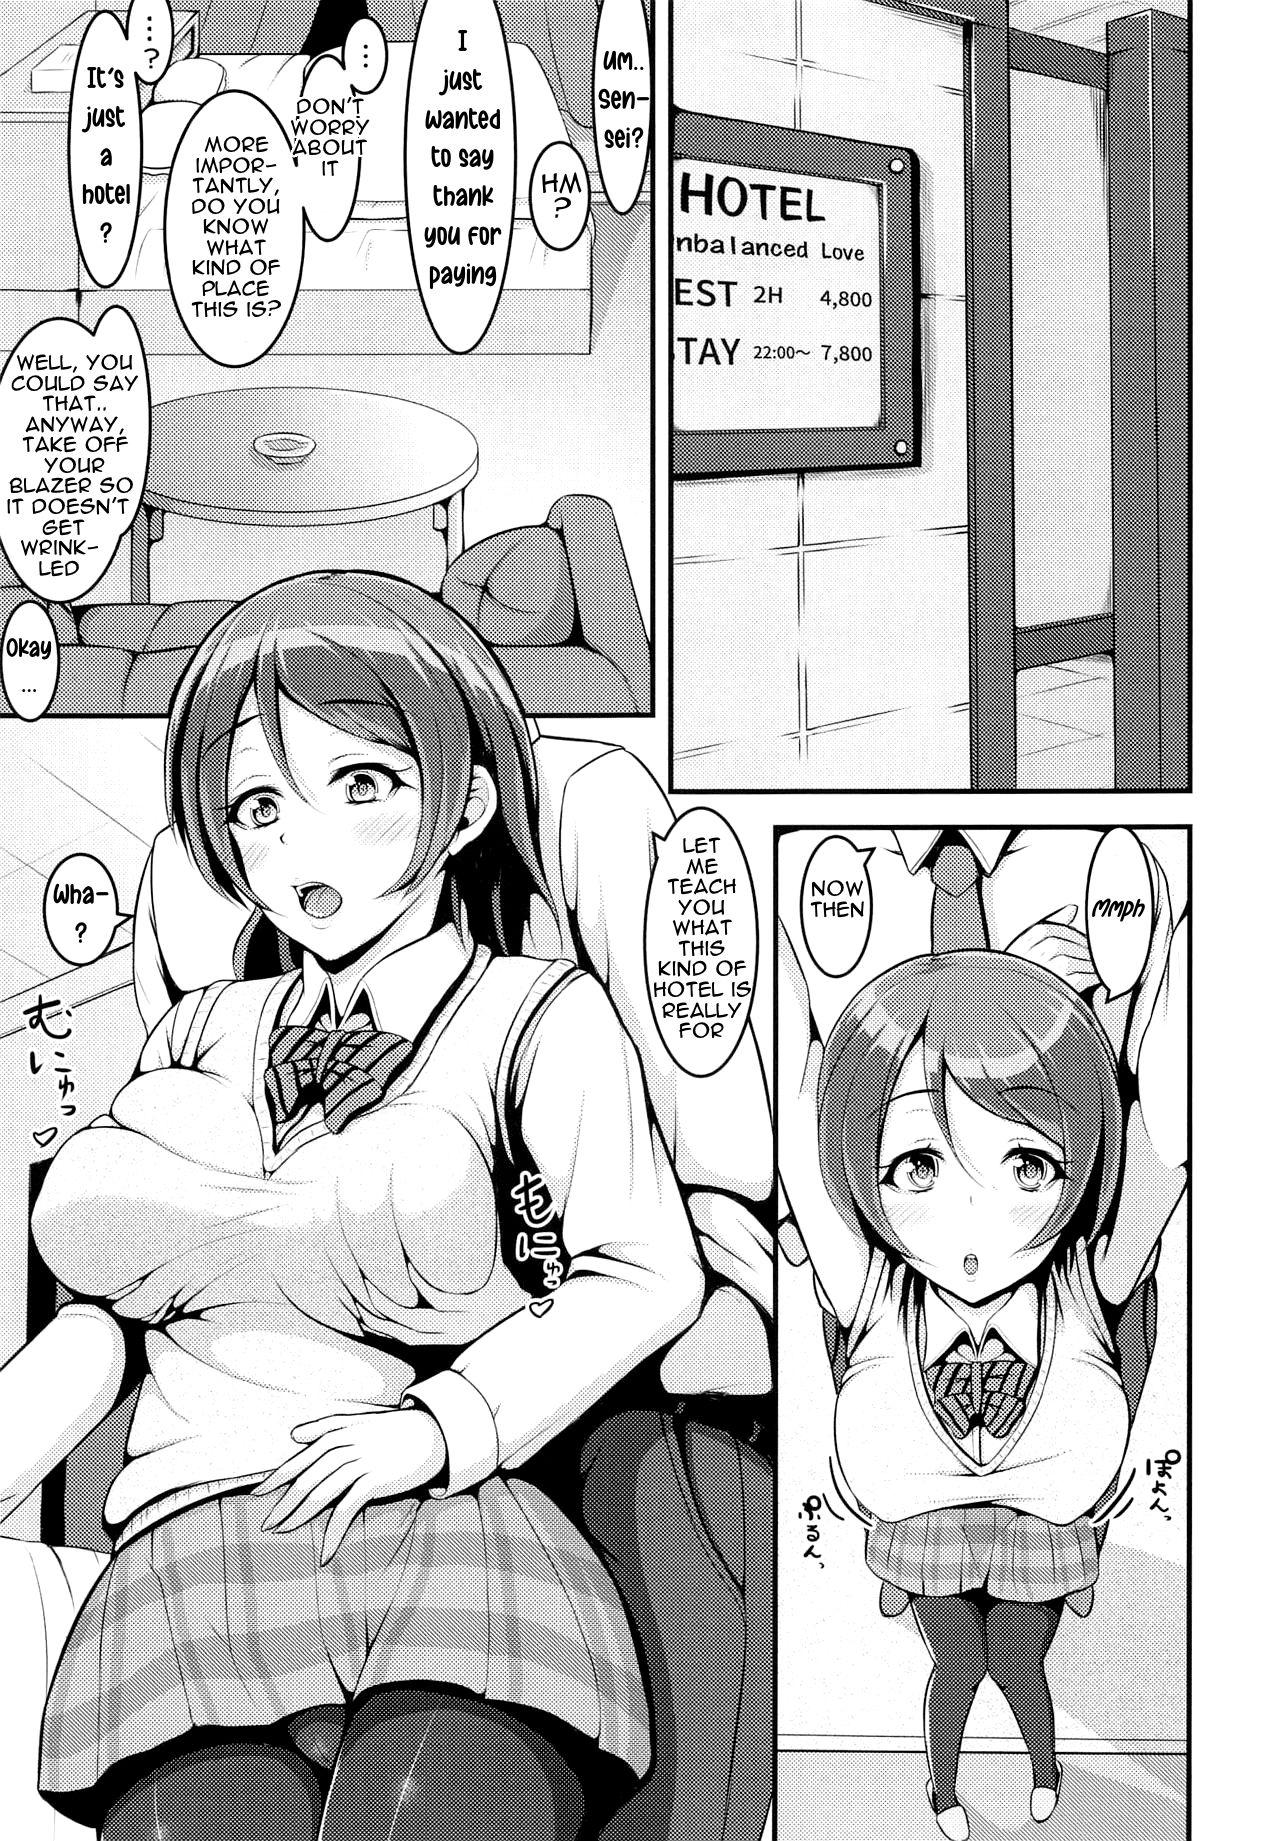 Orgy Flower - Love live Africa - Page 6